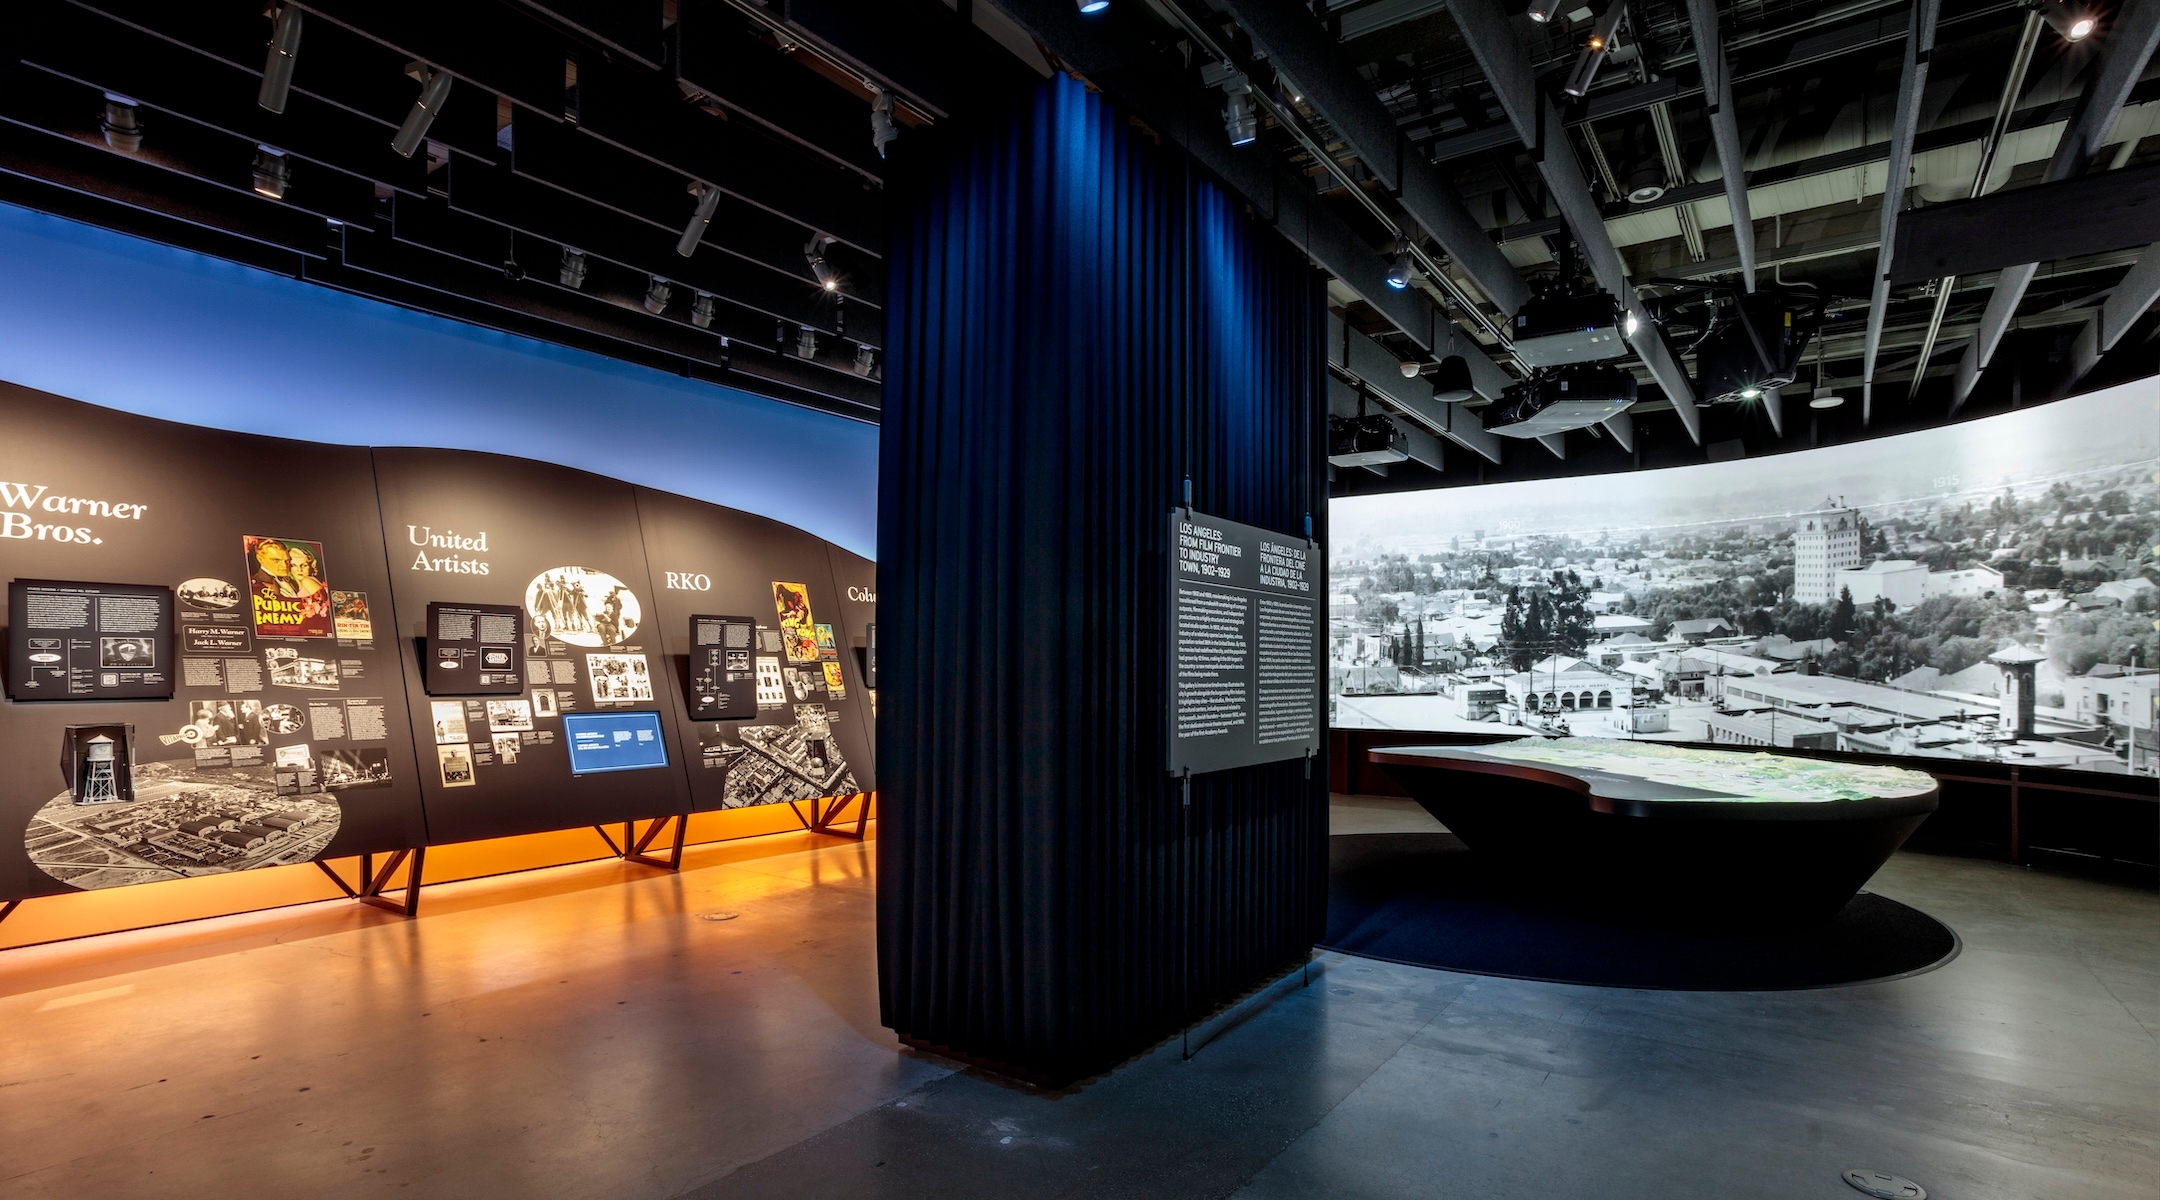 The new “Hollywoodland: Jewish Founders and the Making of a Movie Capital” exhibit at the Academy Museum of Motion Pictures in Los Angeles. (Josh White, JWPictures/Academy Museum Foundation)